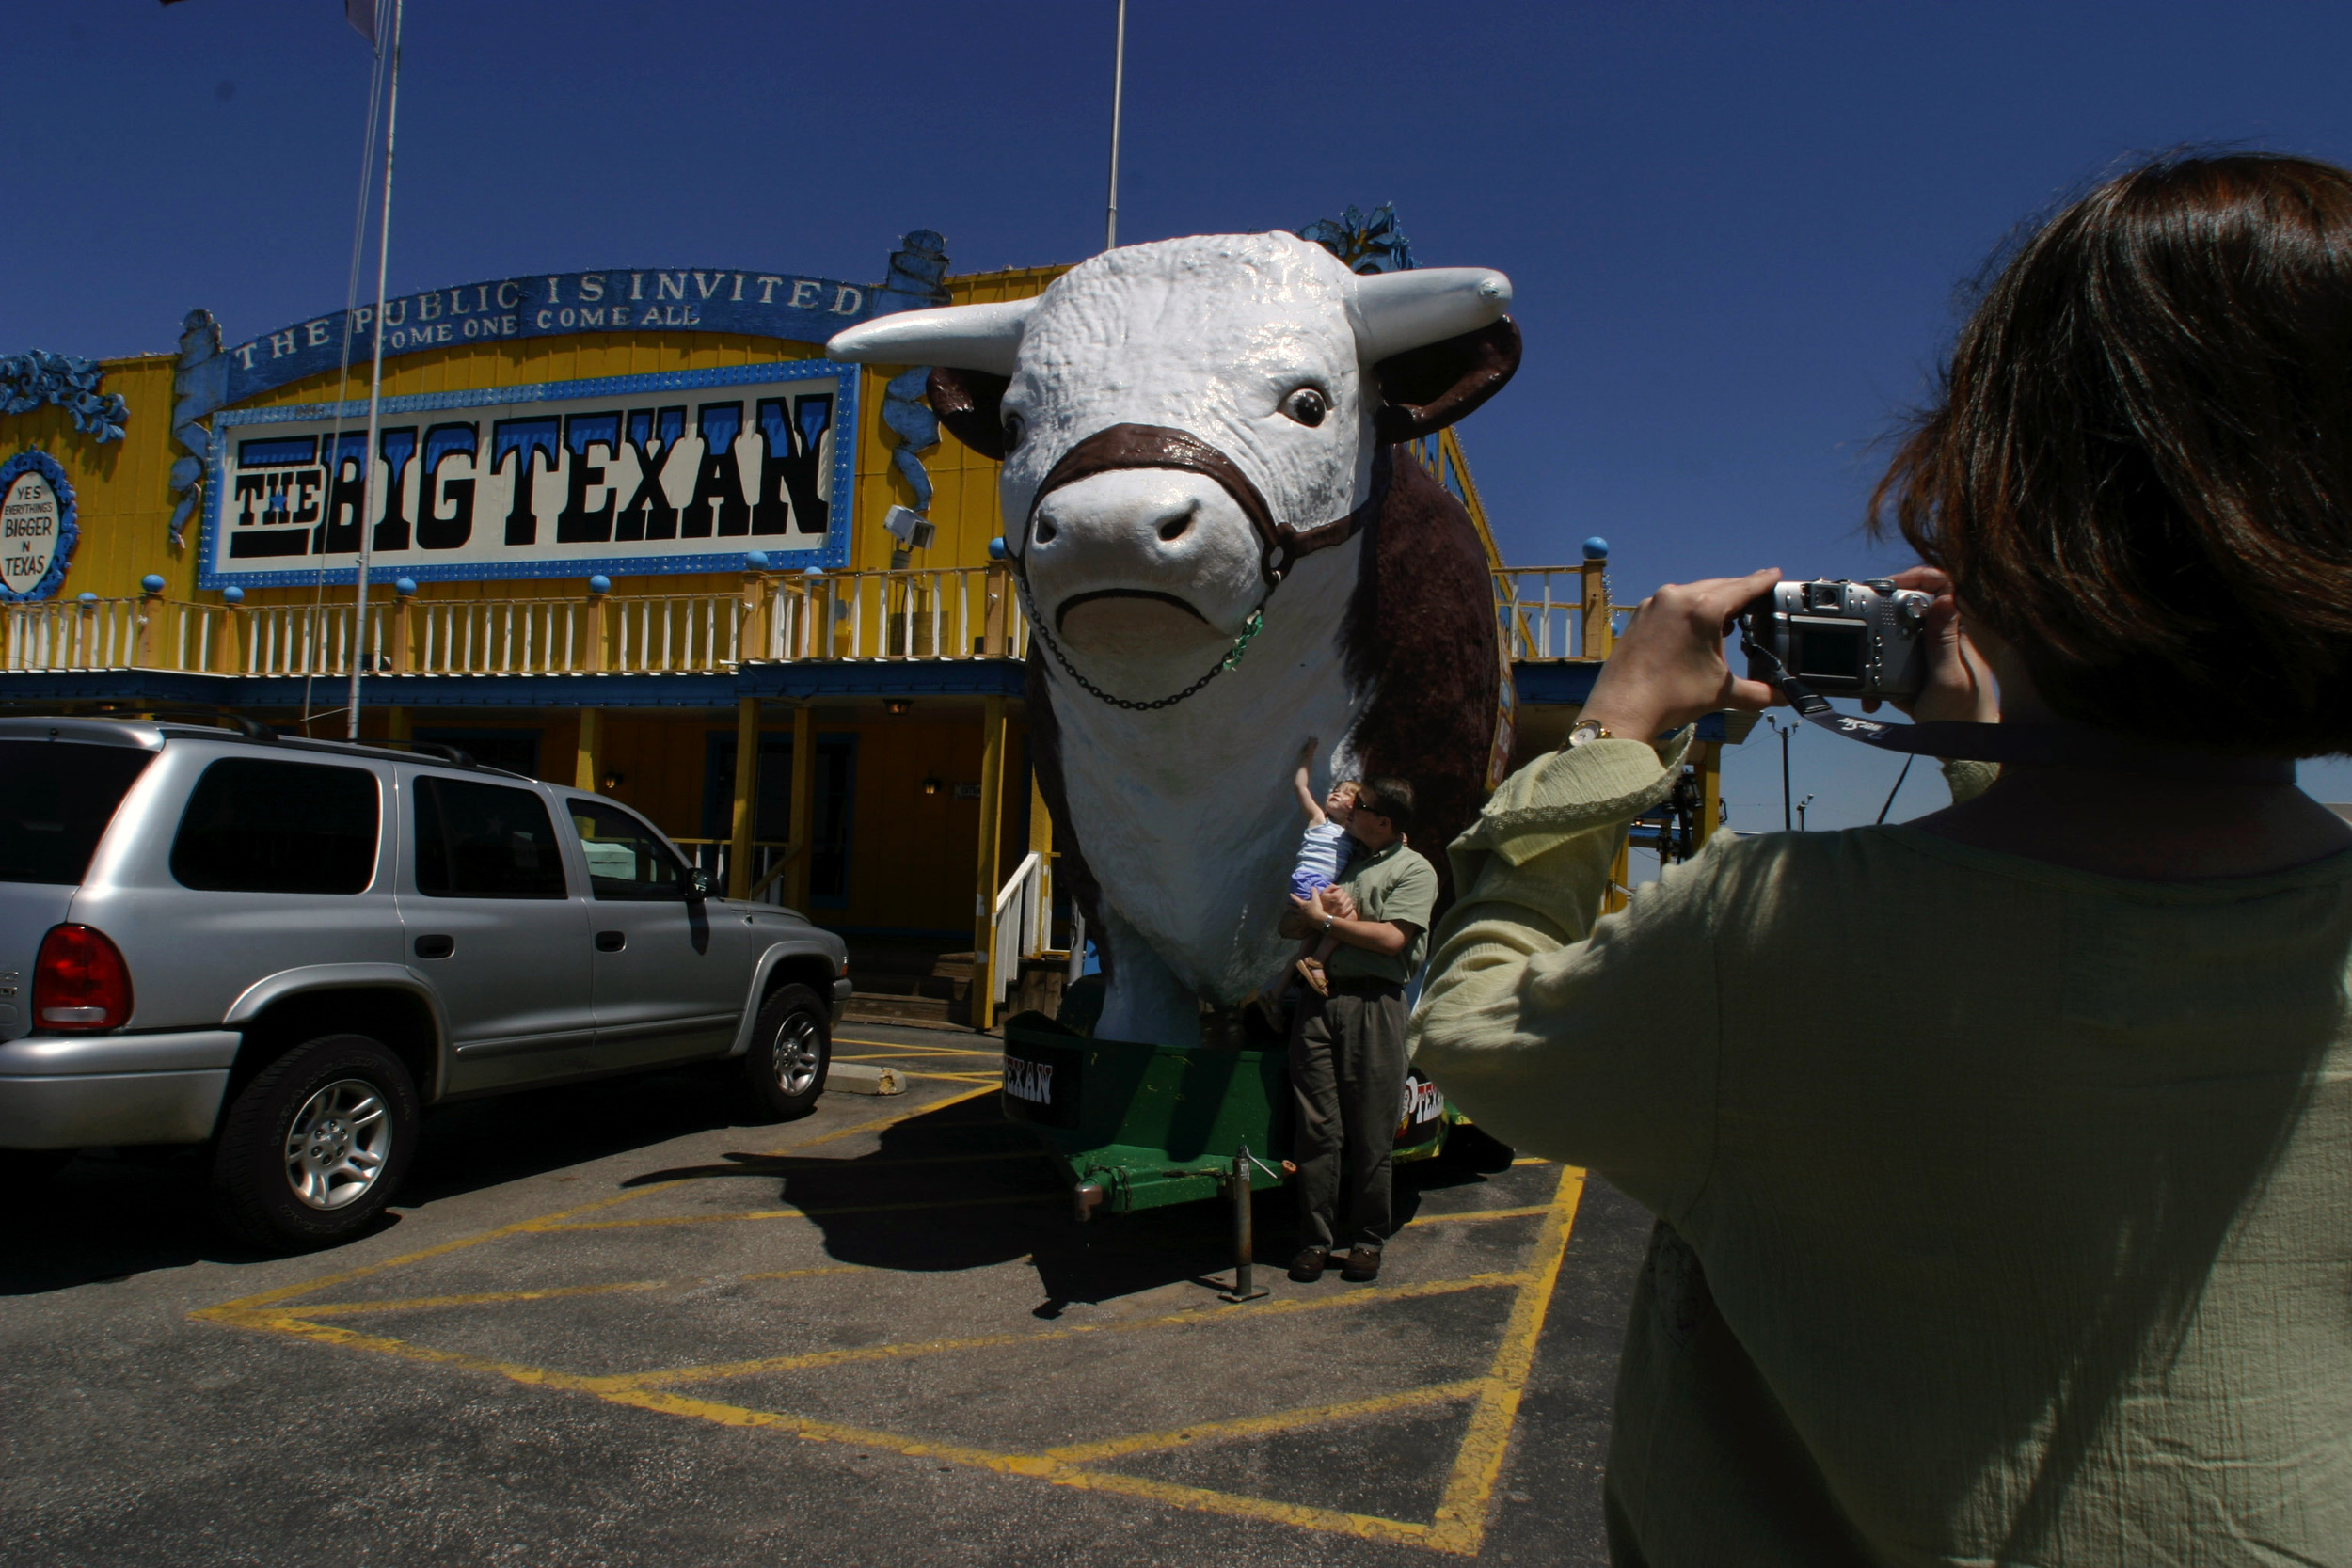  Tourists stop in at the Big Texan steakhouse to snap a photo with the giant cow in Amarillo, Texas. 